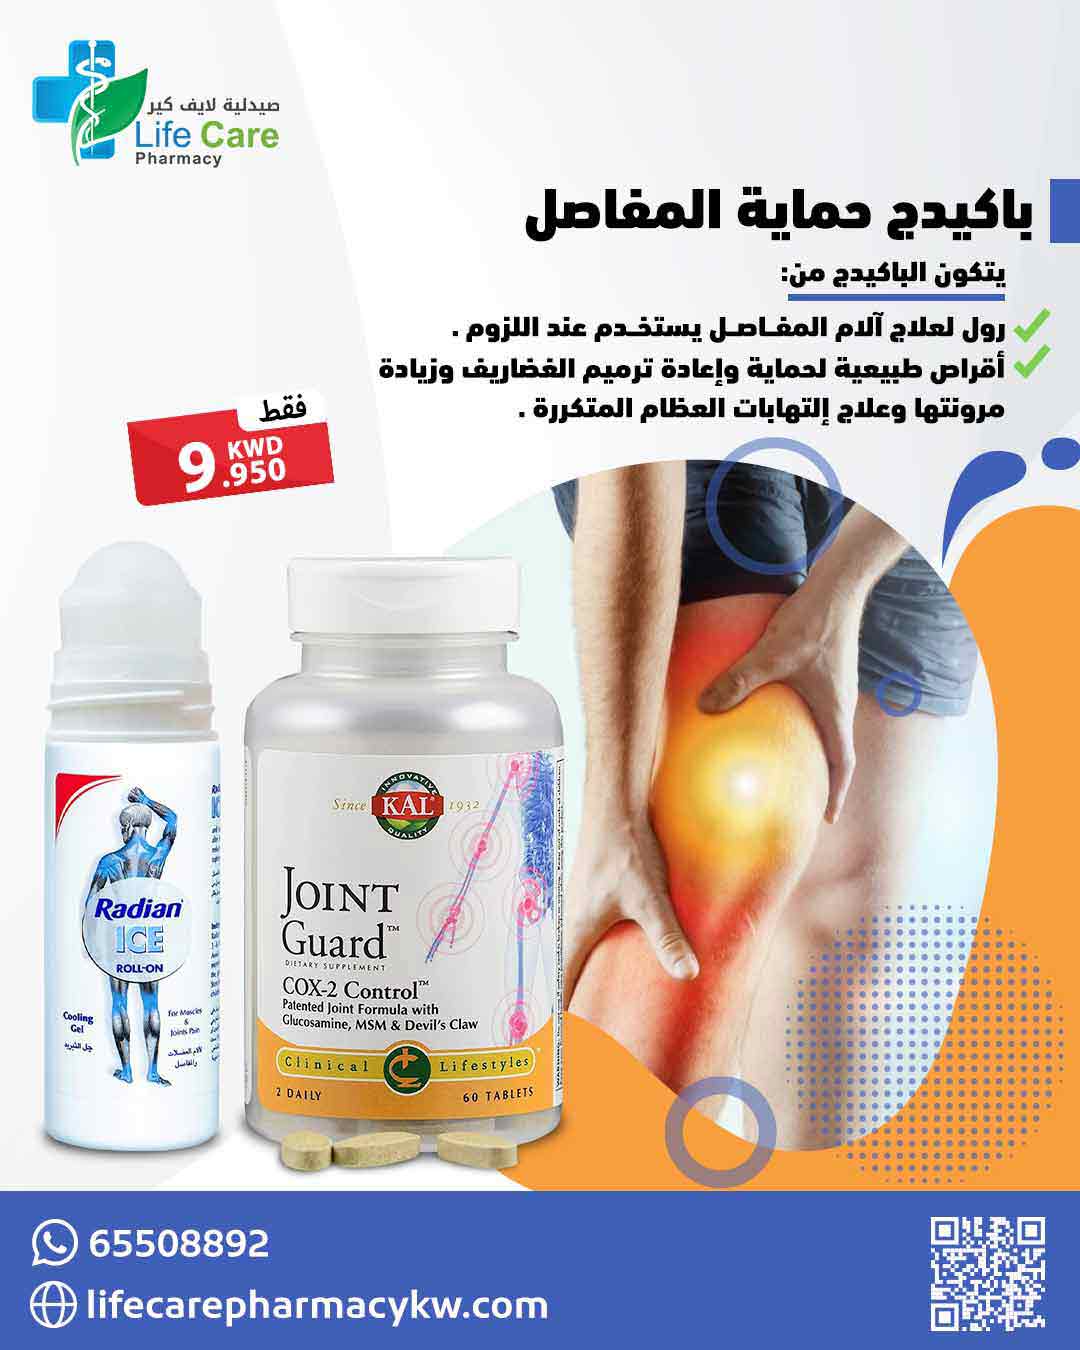 PACKAGE 85 - Life Care Pharmacy